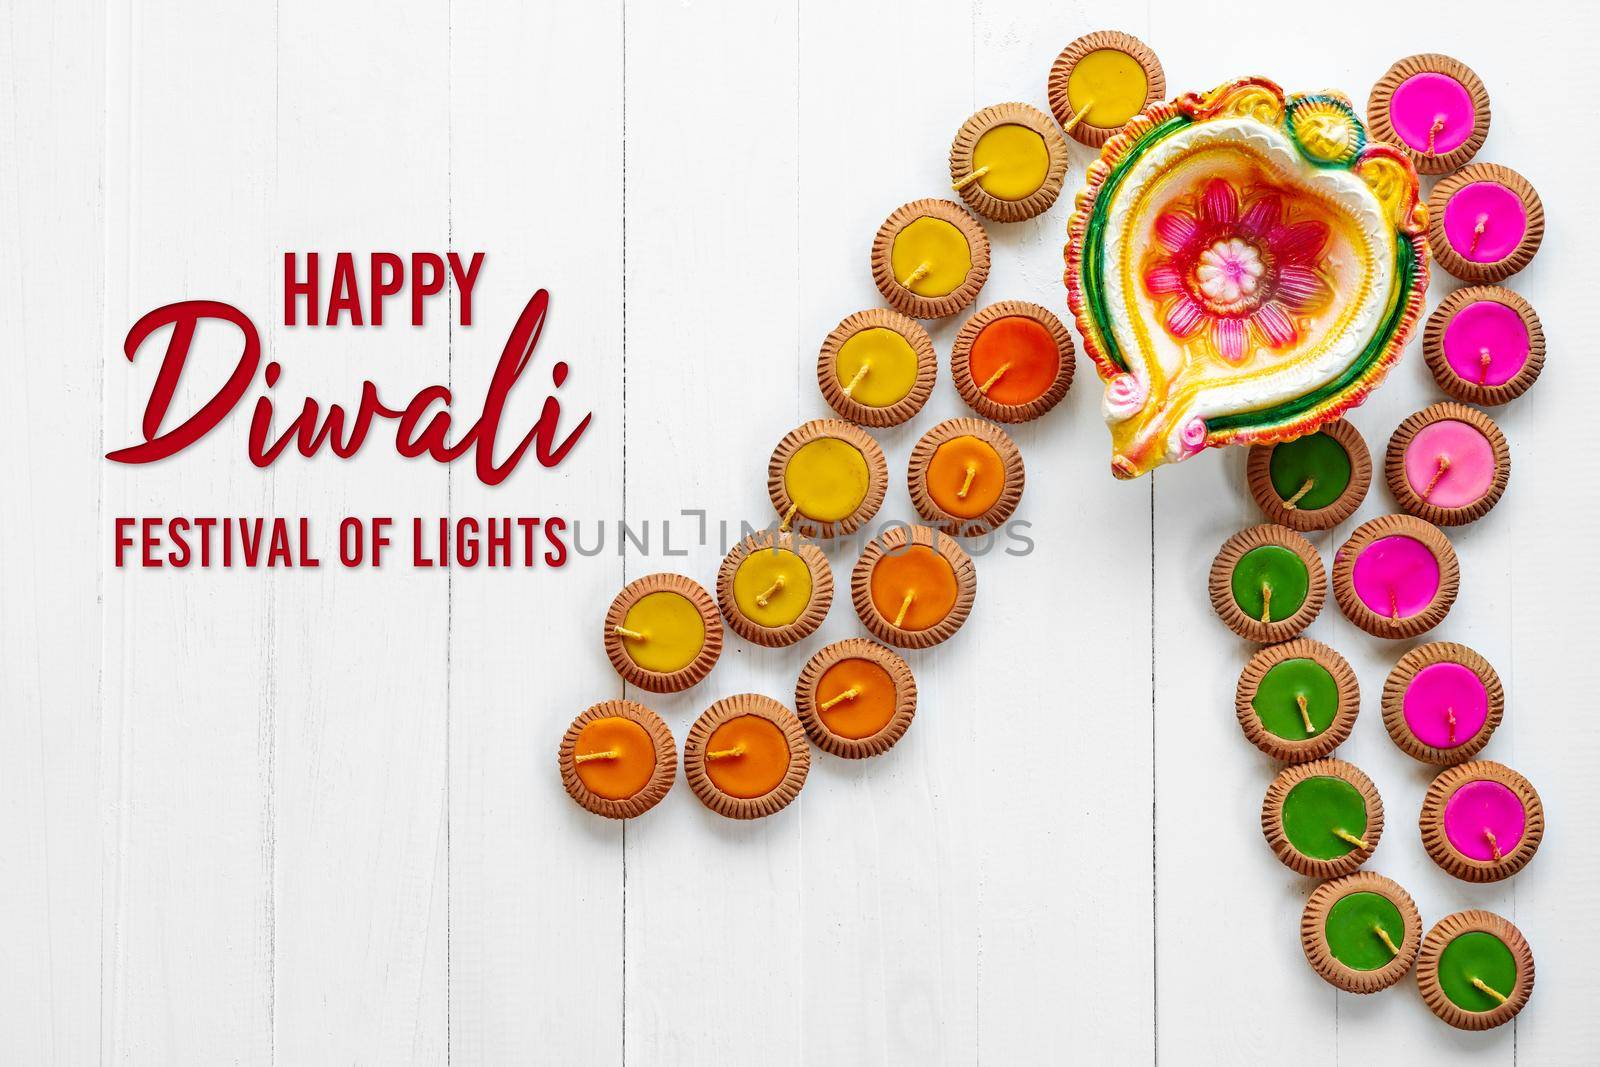 Happy Diwali - Clay Diya lamps lit during Dipavali, Hindu festival of lights celebration. Colorful traditional oil lamp diya on white wooden background